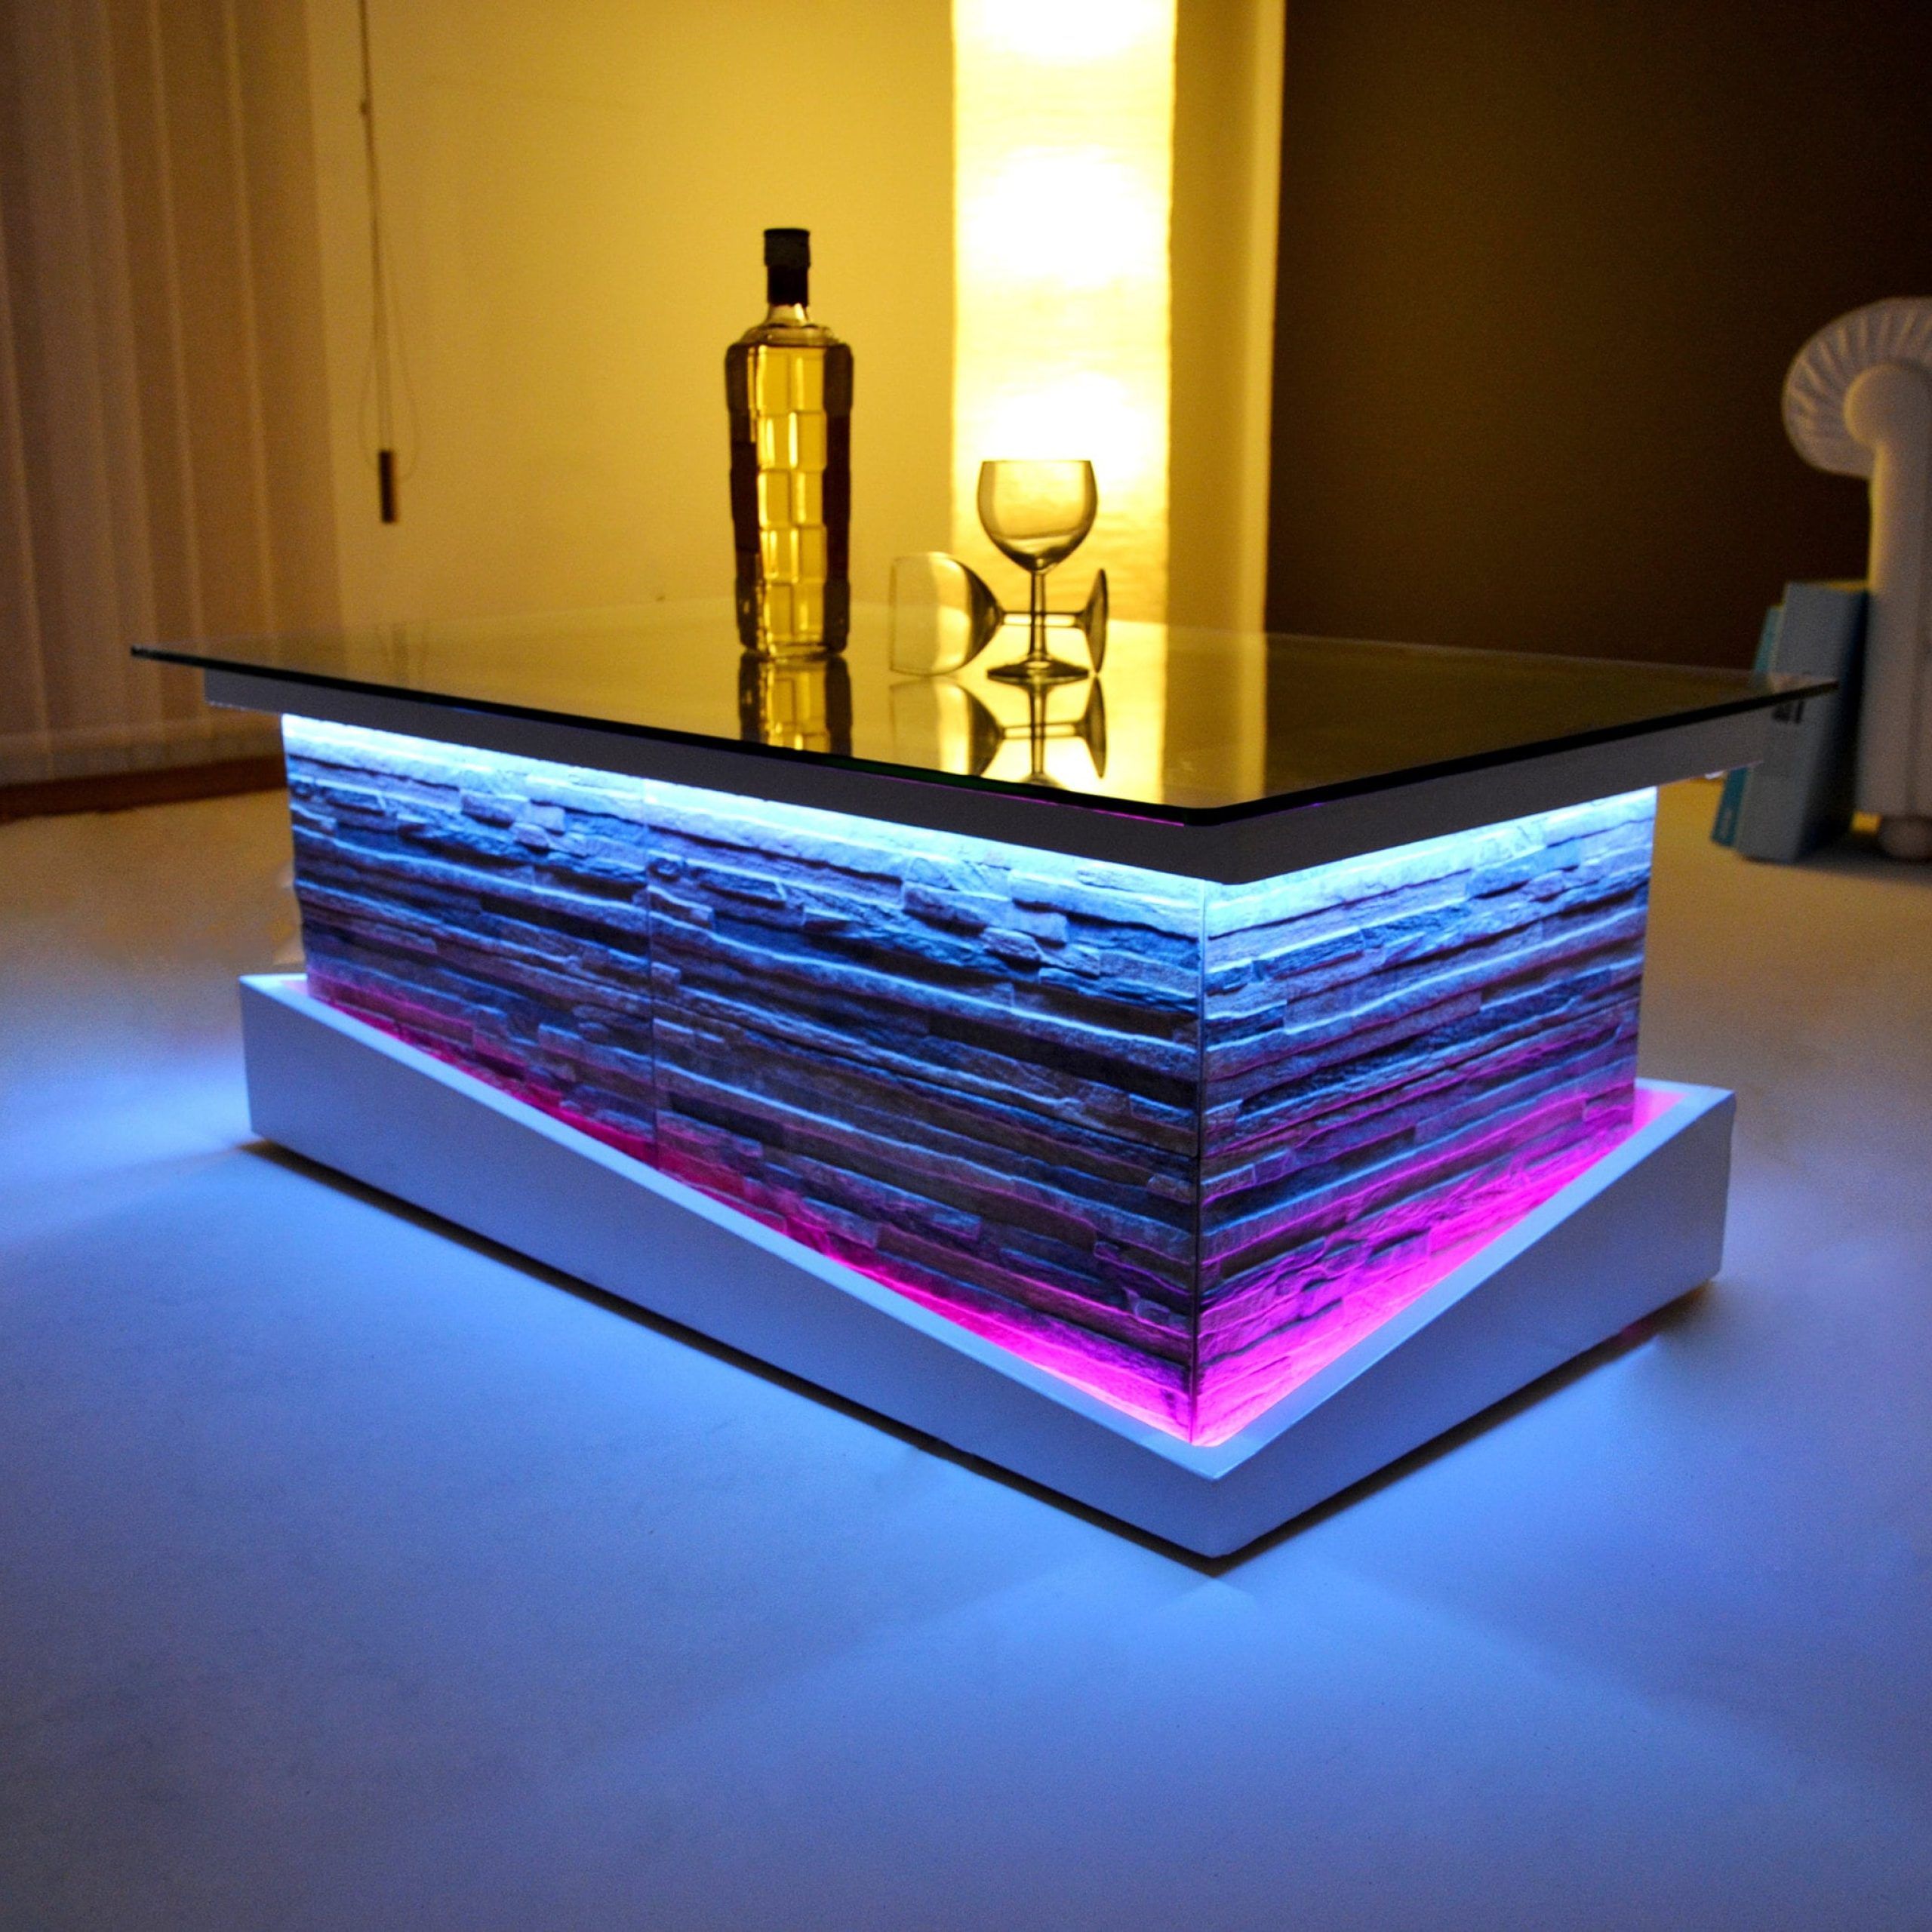 Glass Coffee Table With Led Lights Rustic / Modern Design | Etsy In Coffee Tables With Drawers And Led Lights (View 12 of 20)